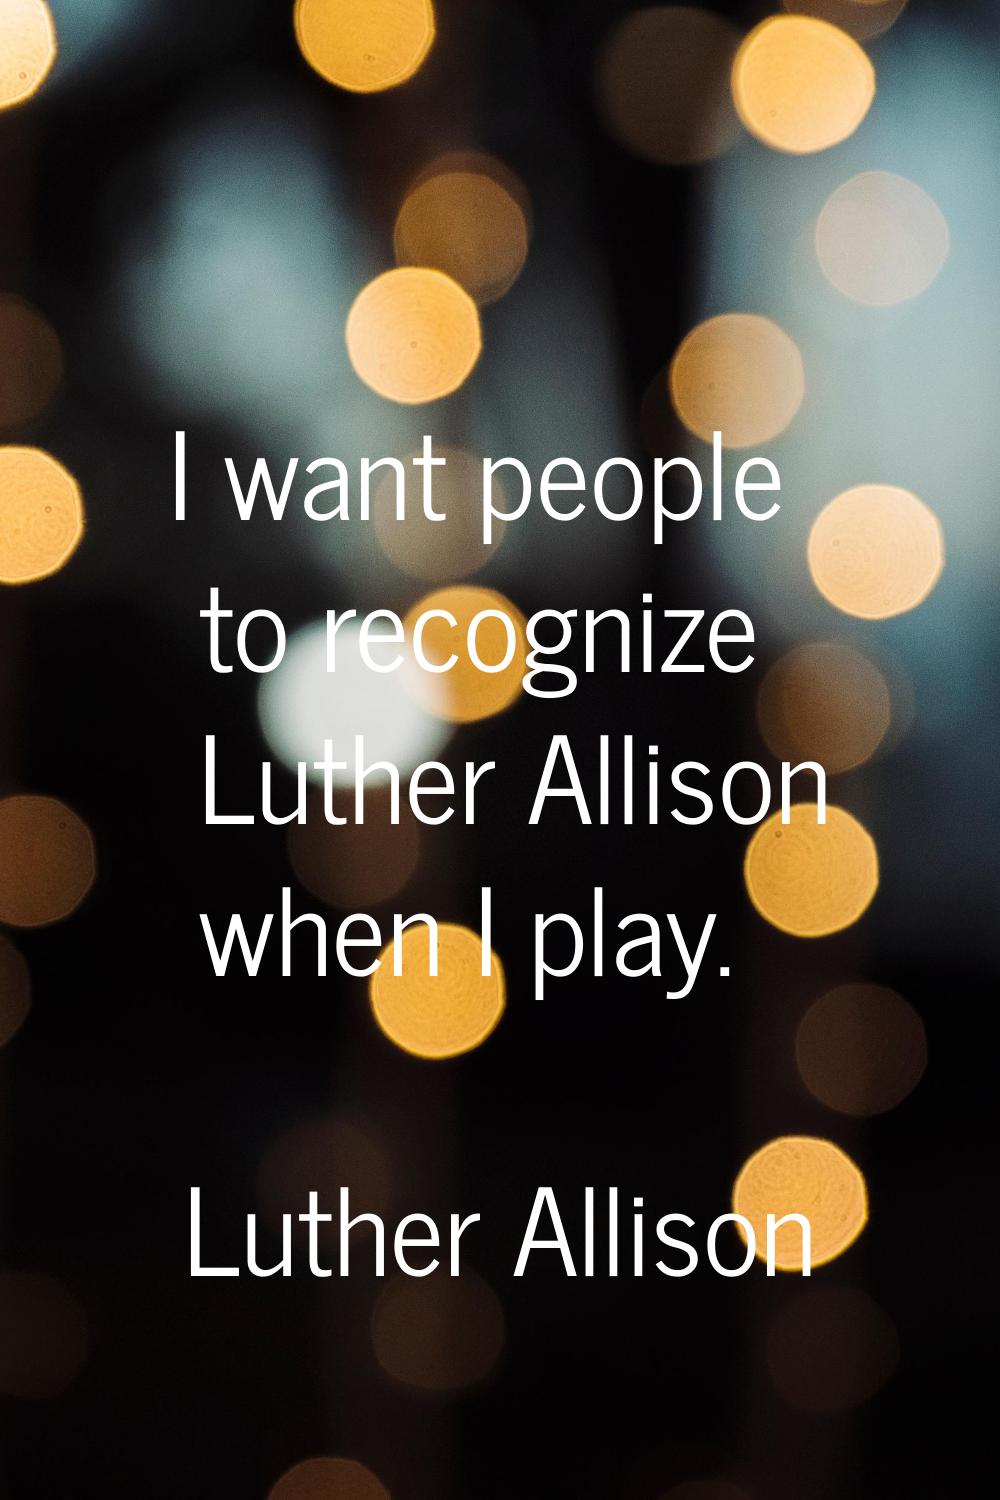 I want people to recognize Luther Allison when I play.